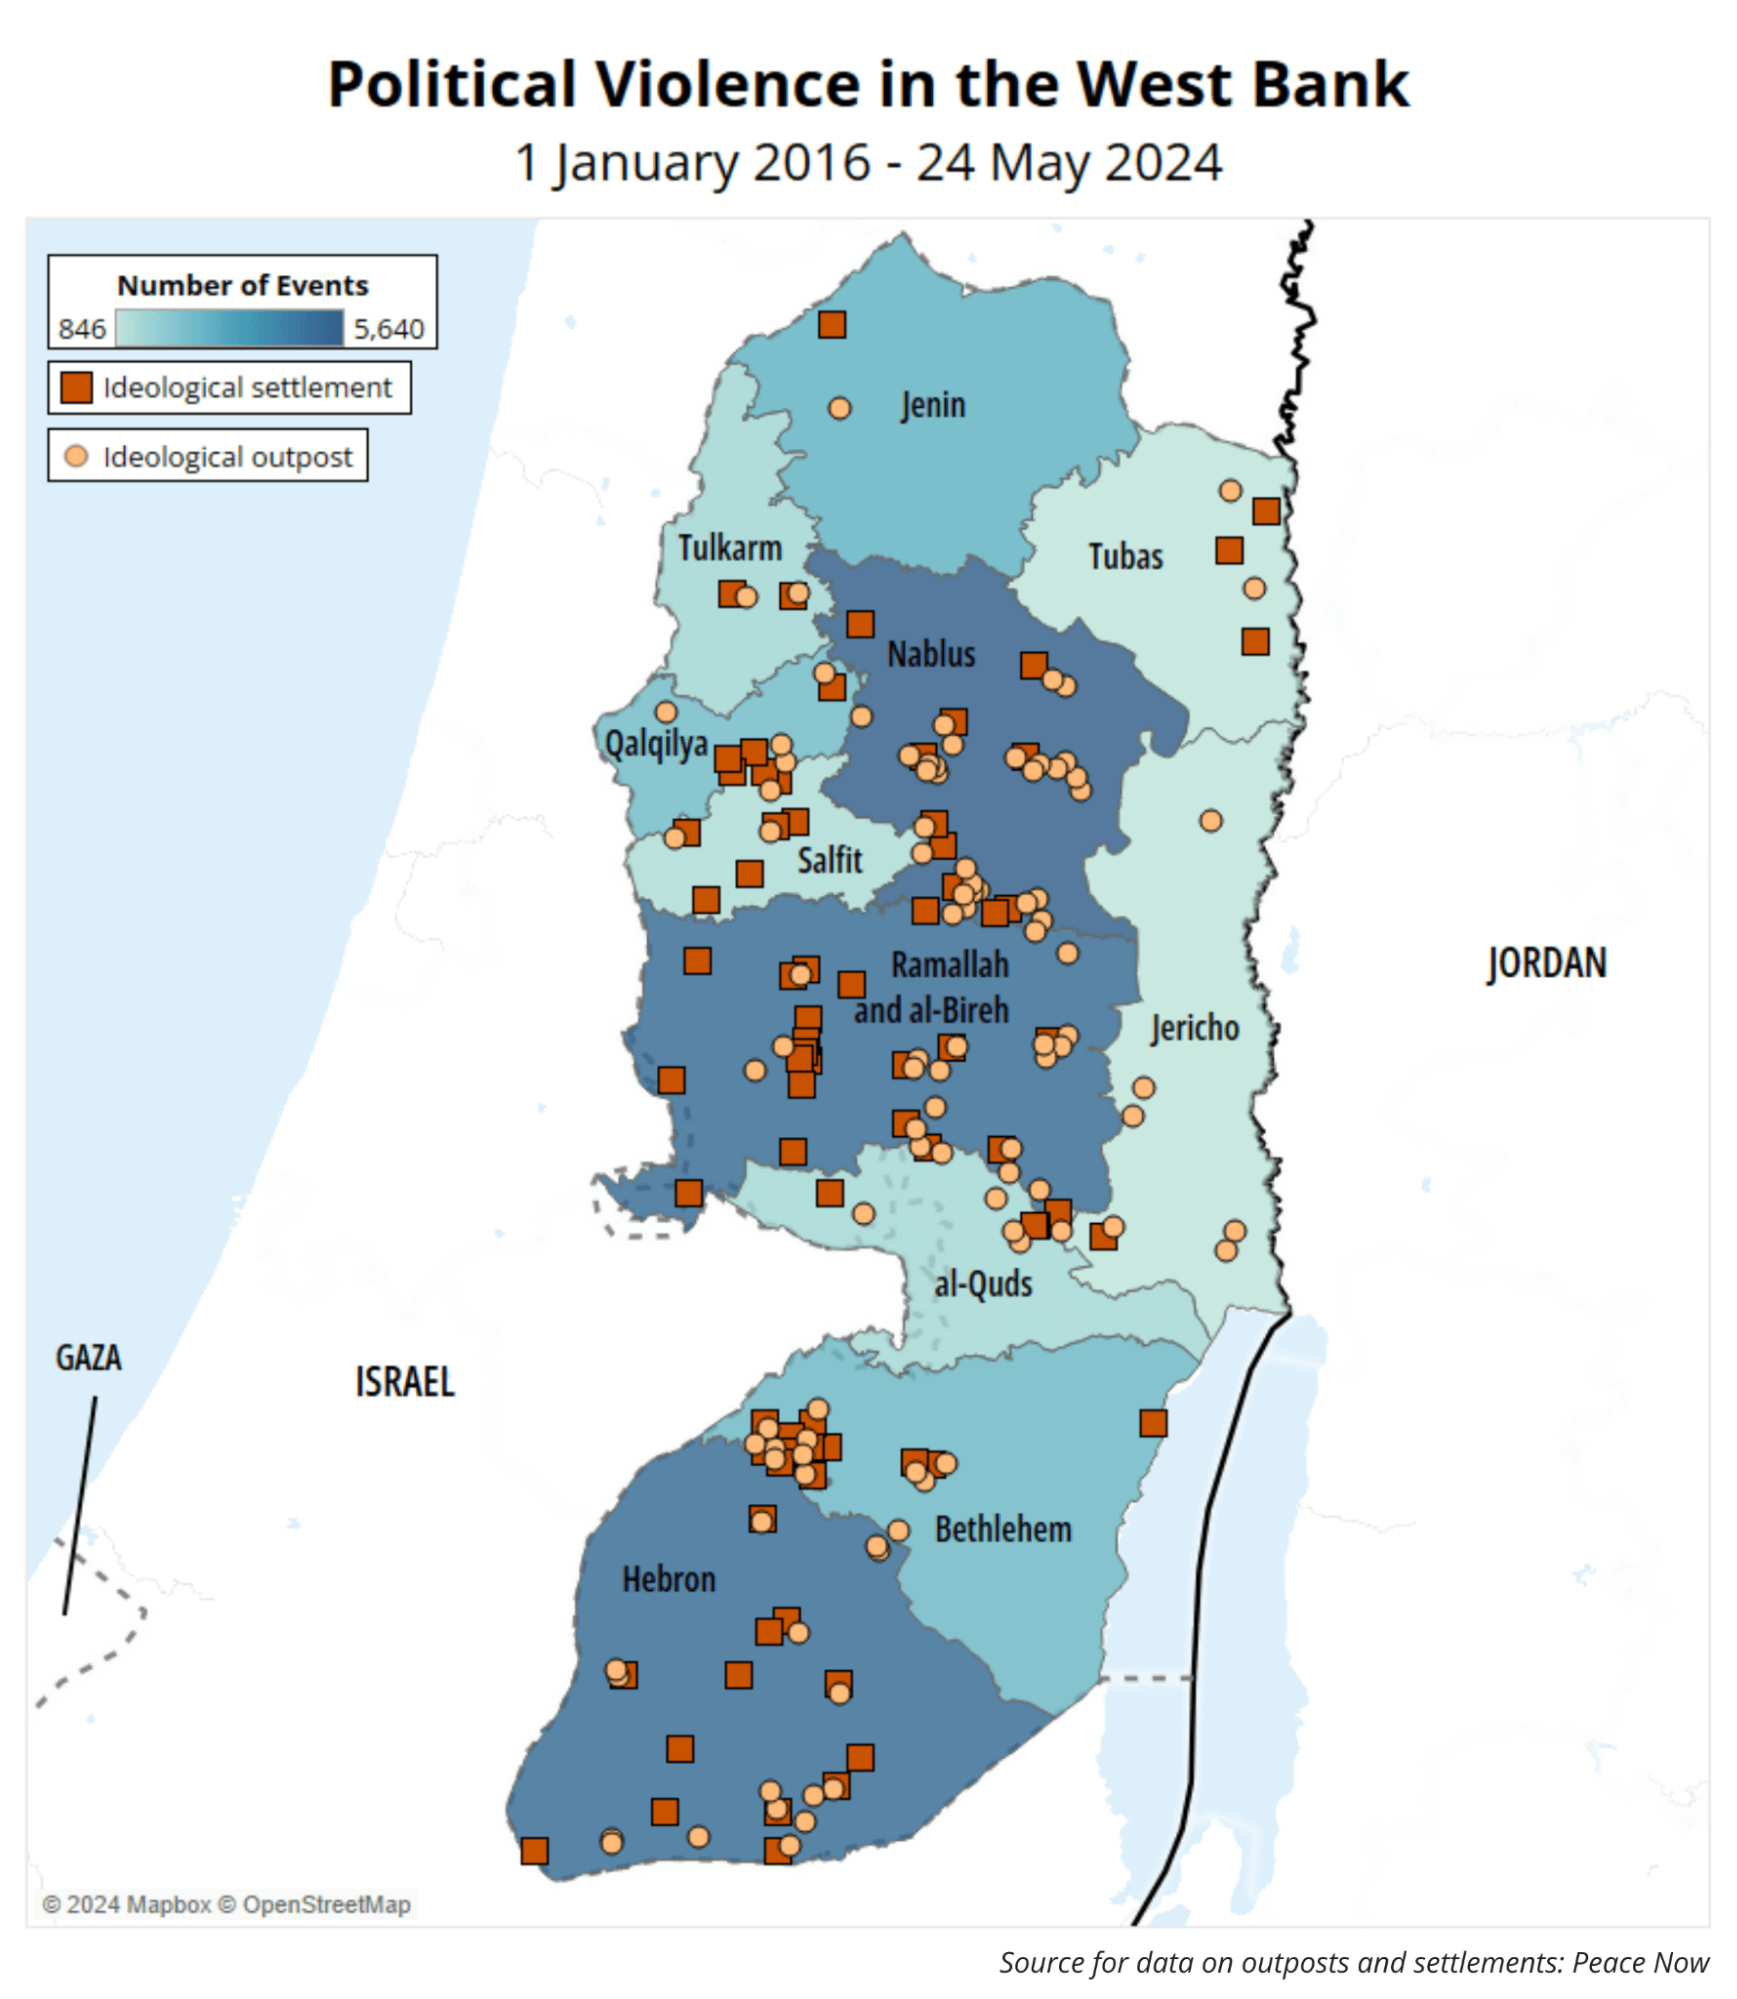 Map - Political Violence in the West Bank 1 January 2016 - 24 May 2024